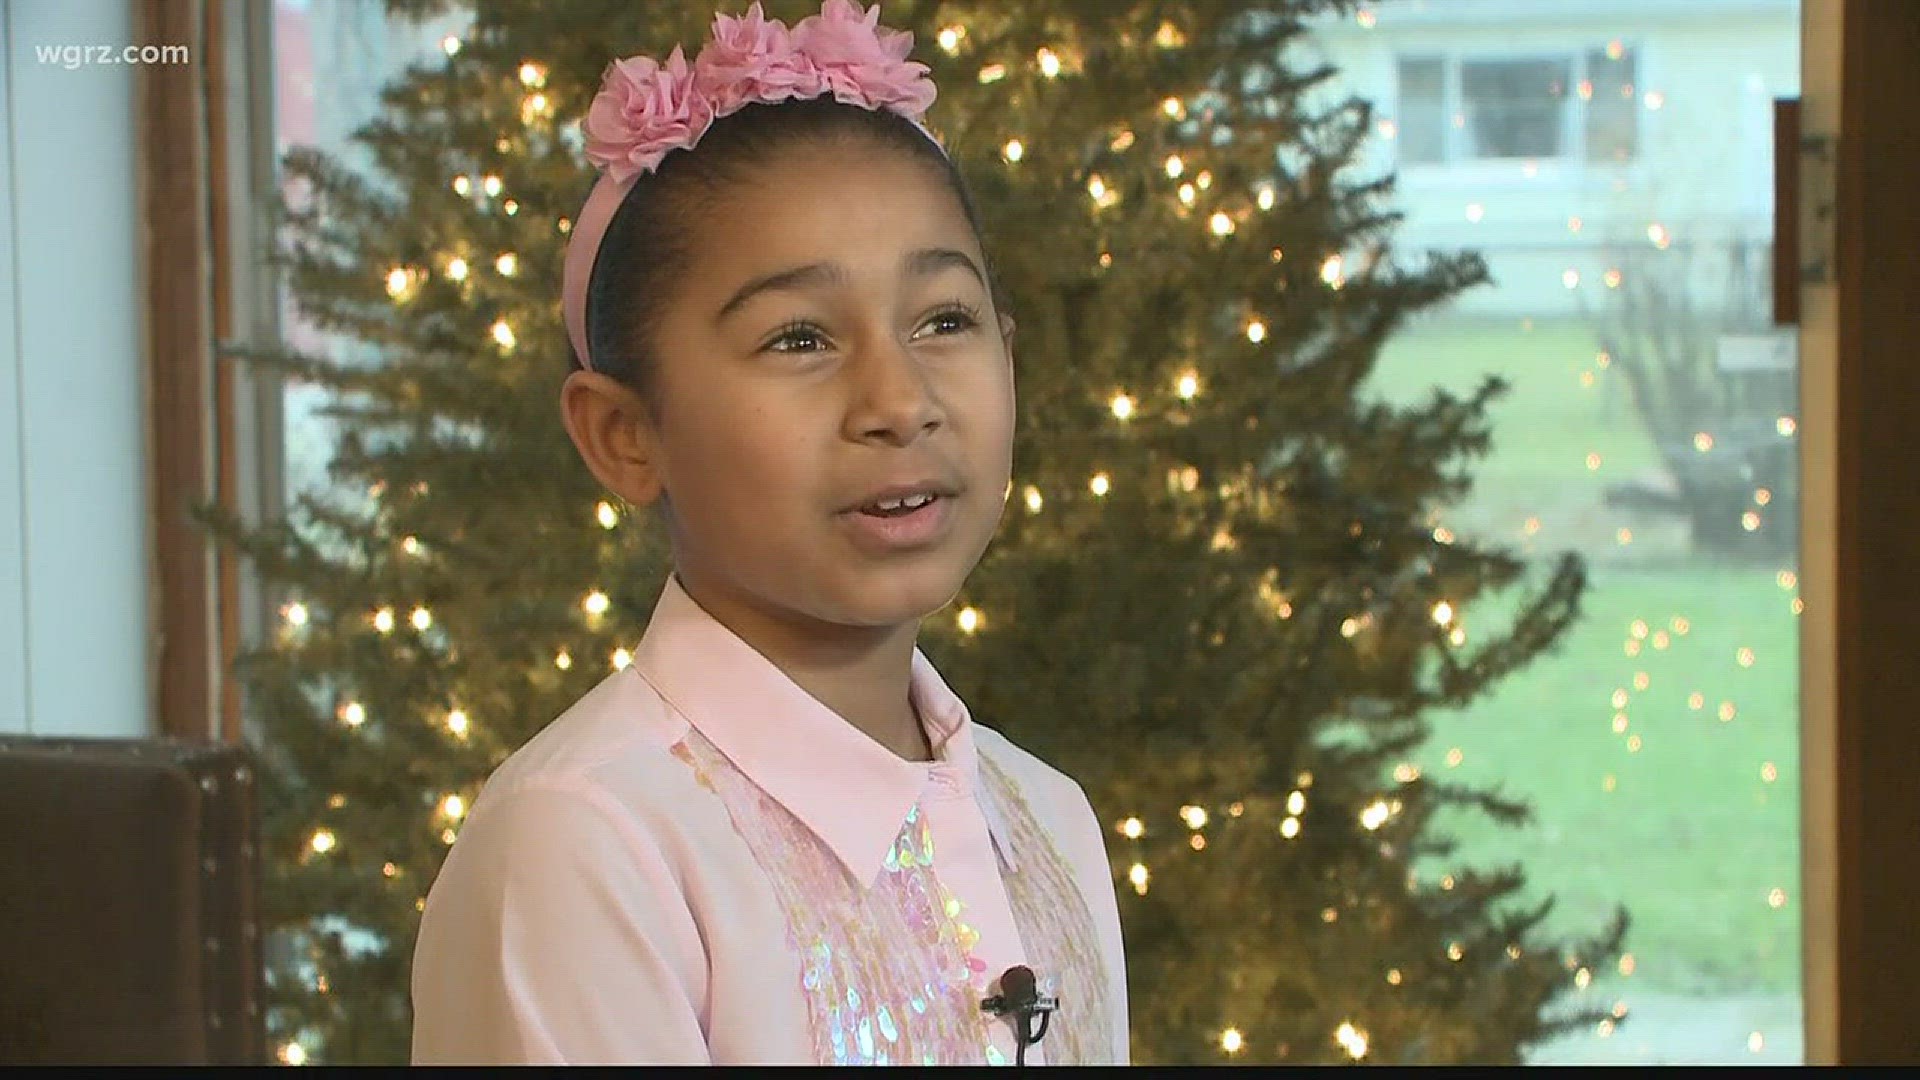 Nya Ricks lit the Tree of Hope four years ago when she was a patient at Roswell Park. She has tips on lighting the Tree of Hope at Roswell Park